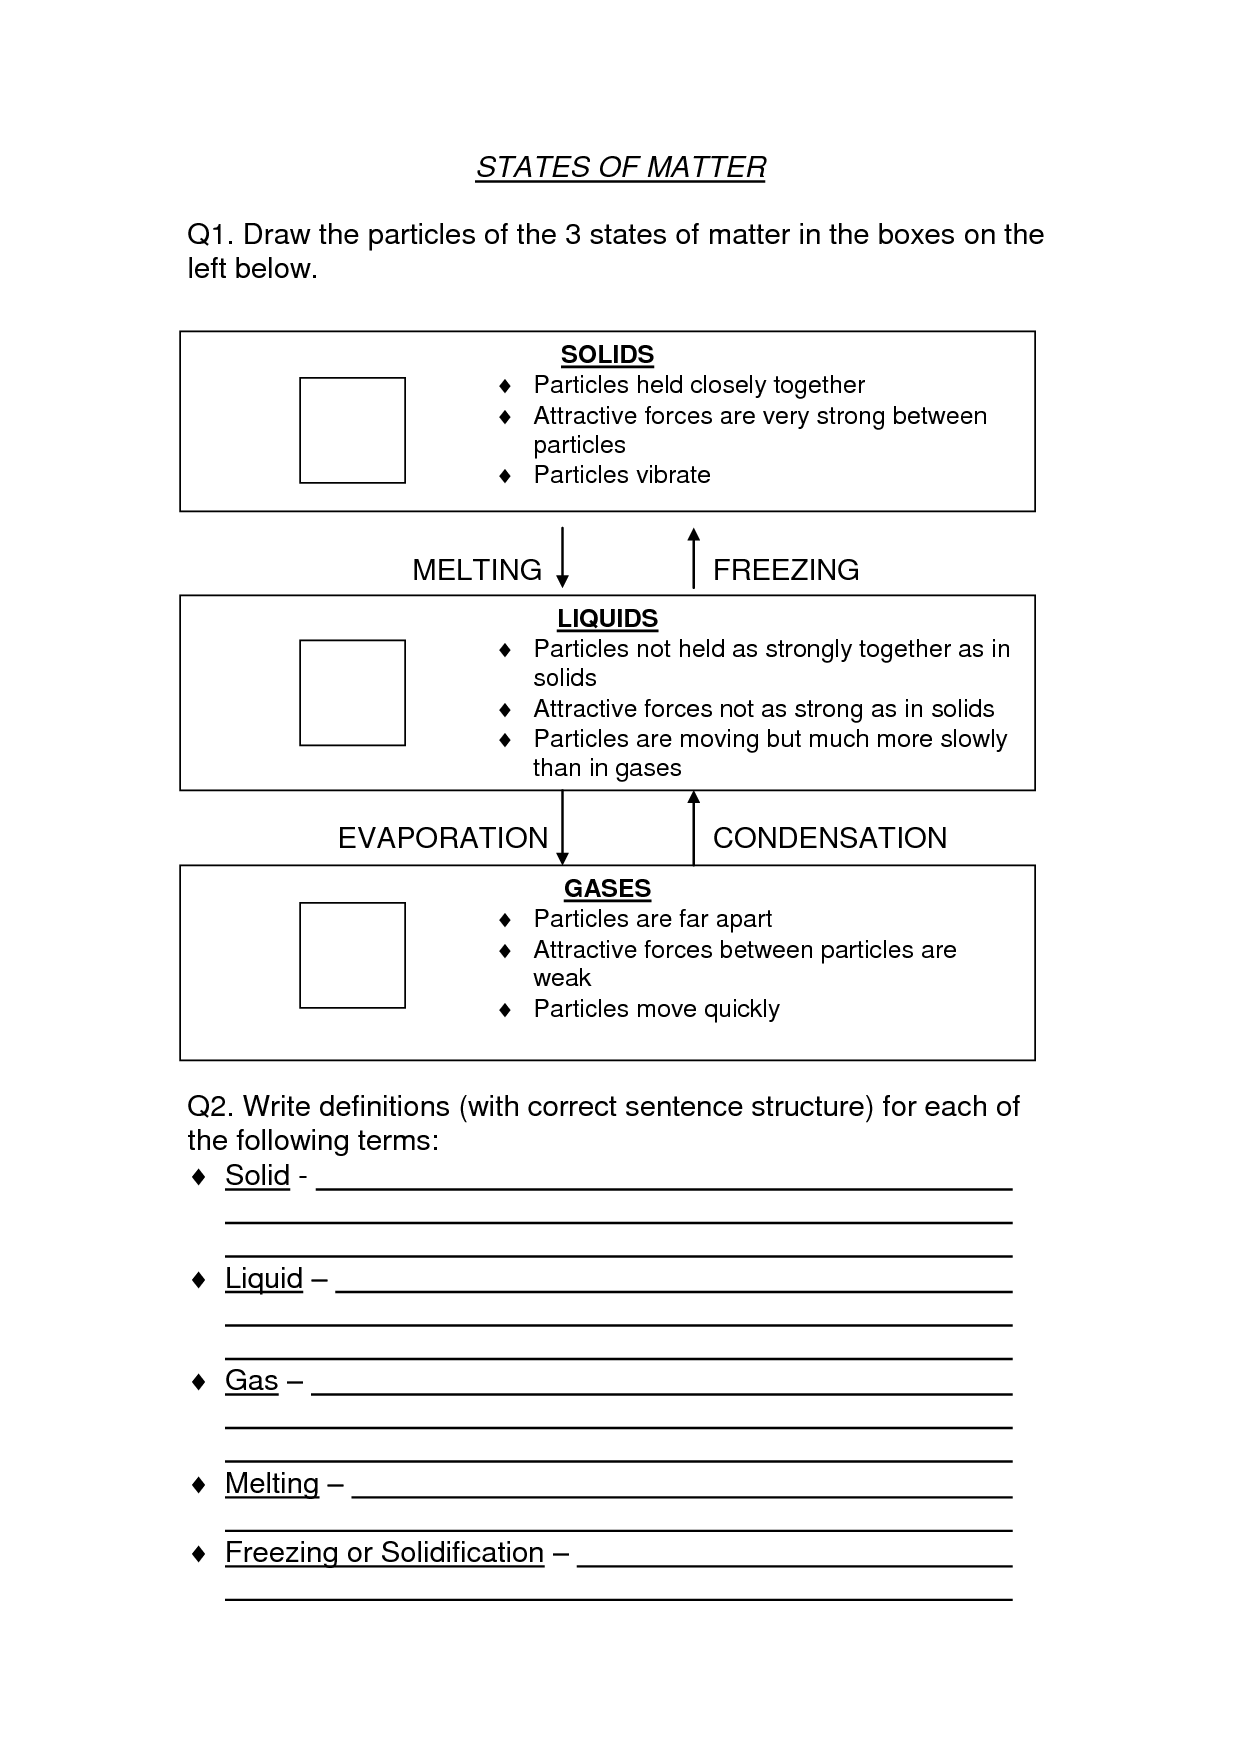 States of Matter 5th Grade Science Worksheets Image